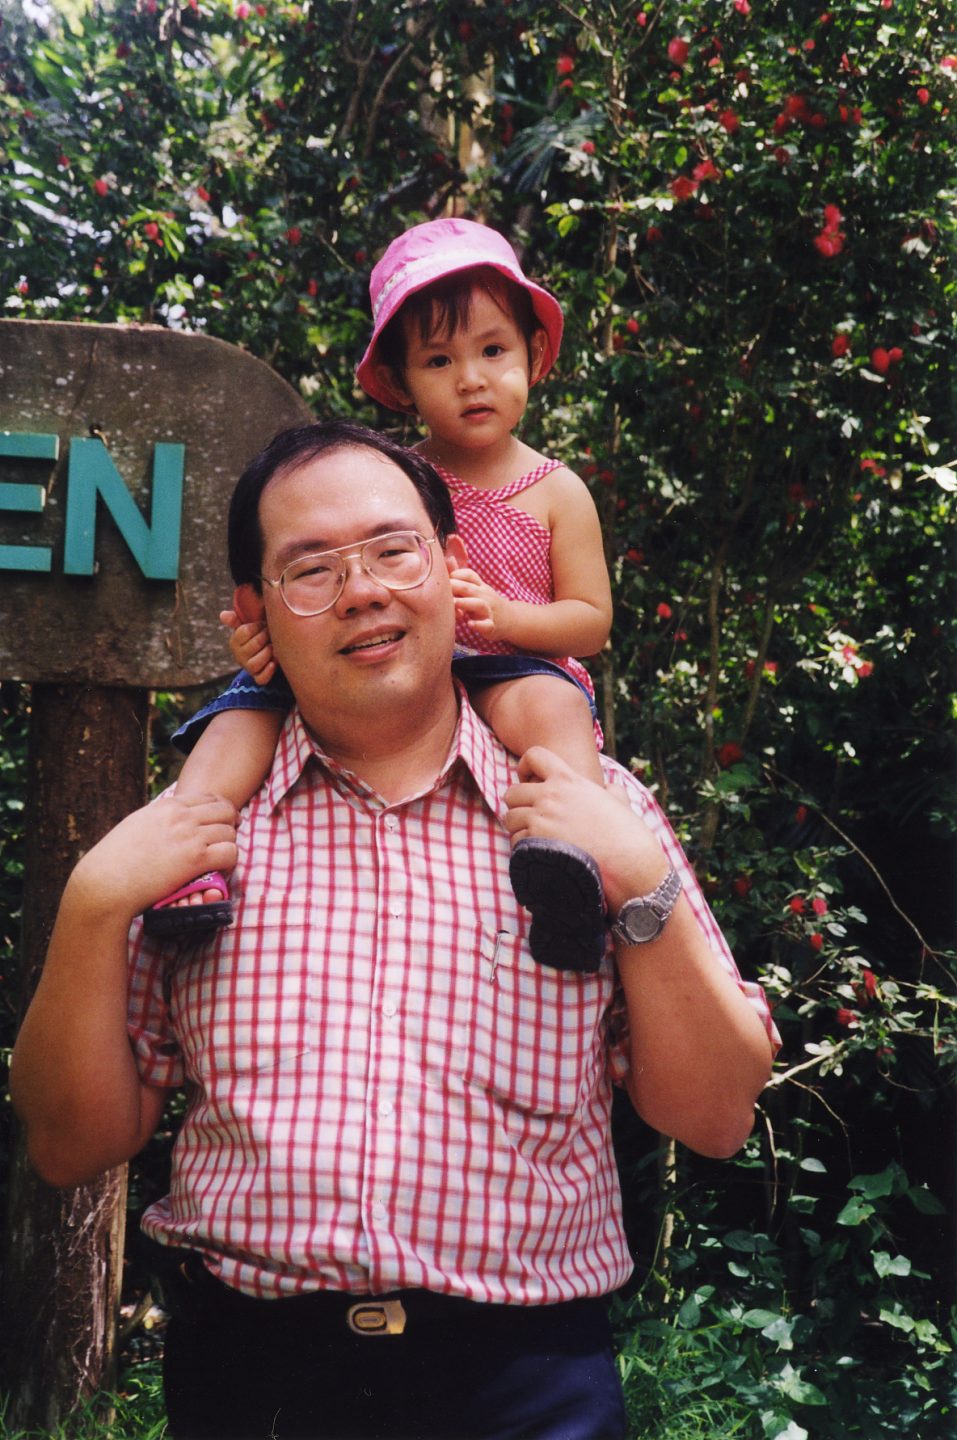 Years after Dr Chao died, Beatrice wondered what gave her father the courage to battle the virus at the cost of his own life. In his final letter penned in 2003, she found the answer.